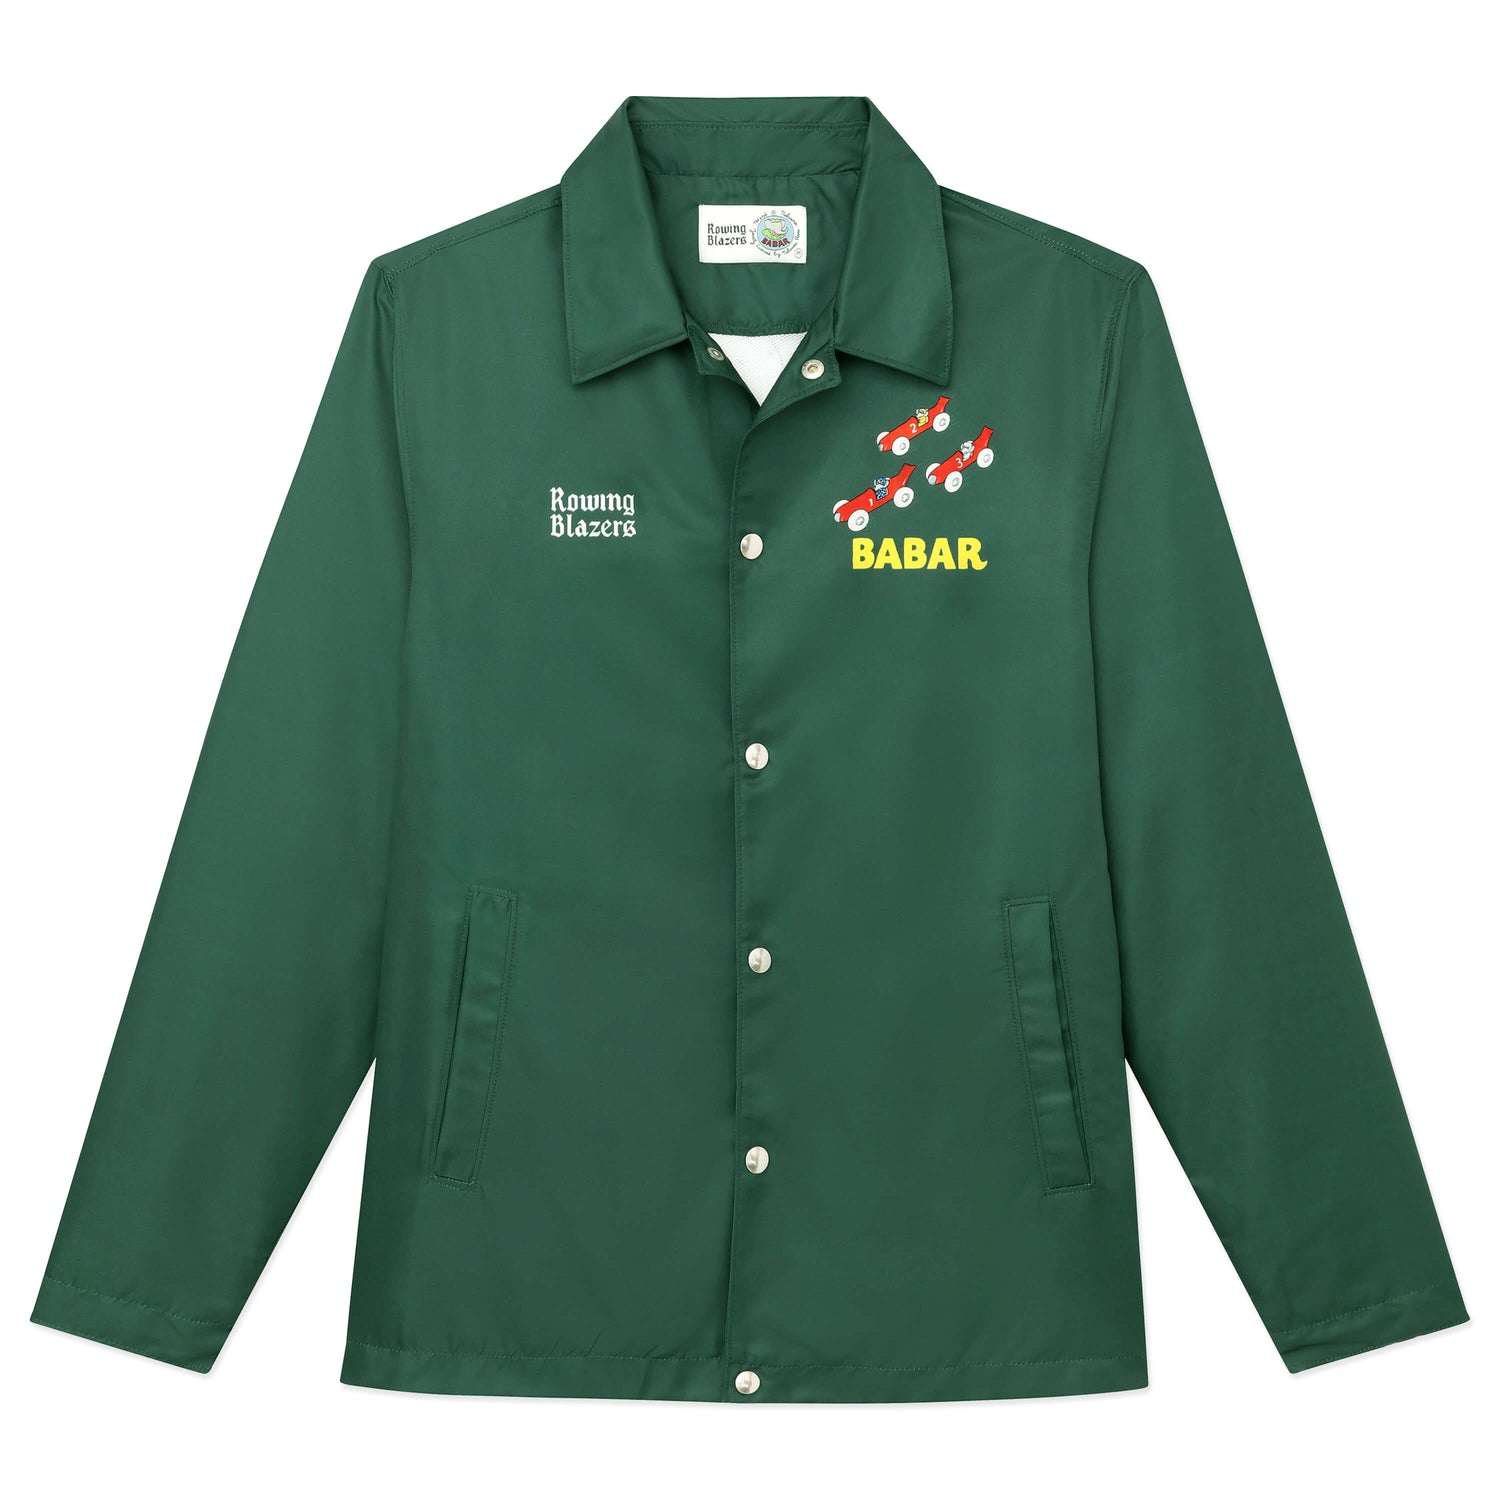 Front of green coach's jacket with printed Babar car motif.